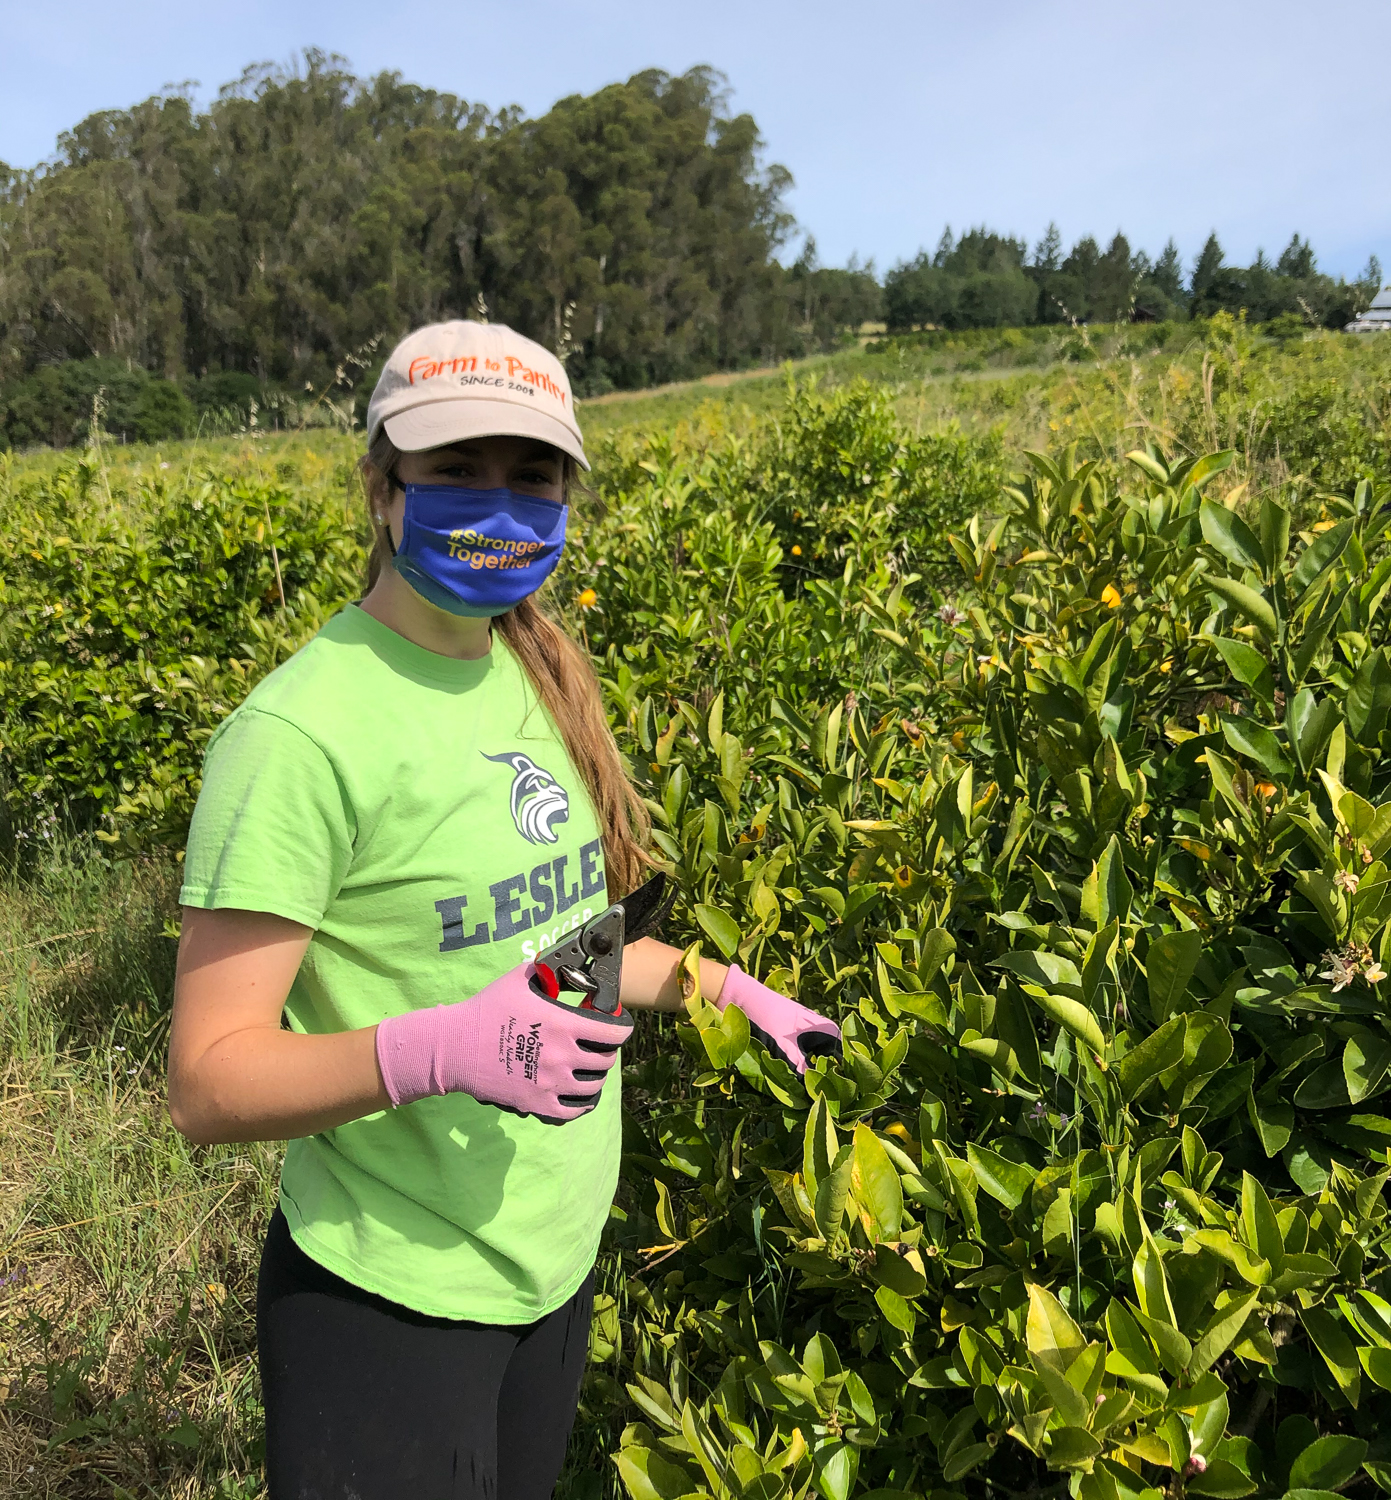 Melanie Mathewson with a mask on and holding shears in a field.